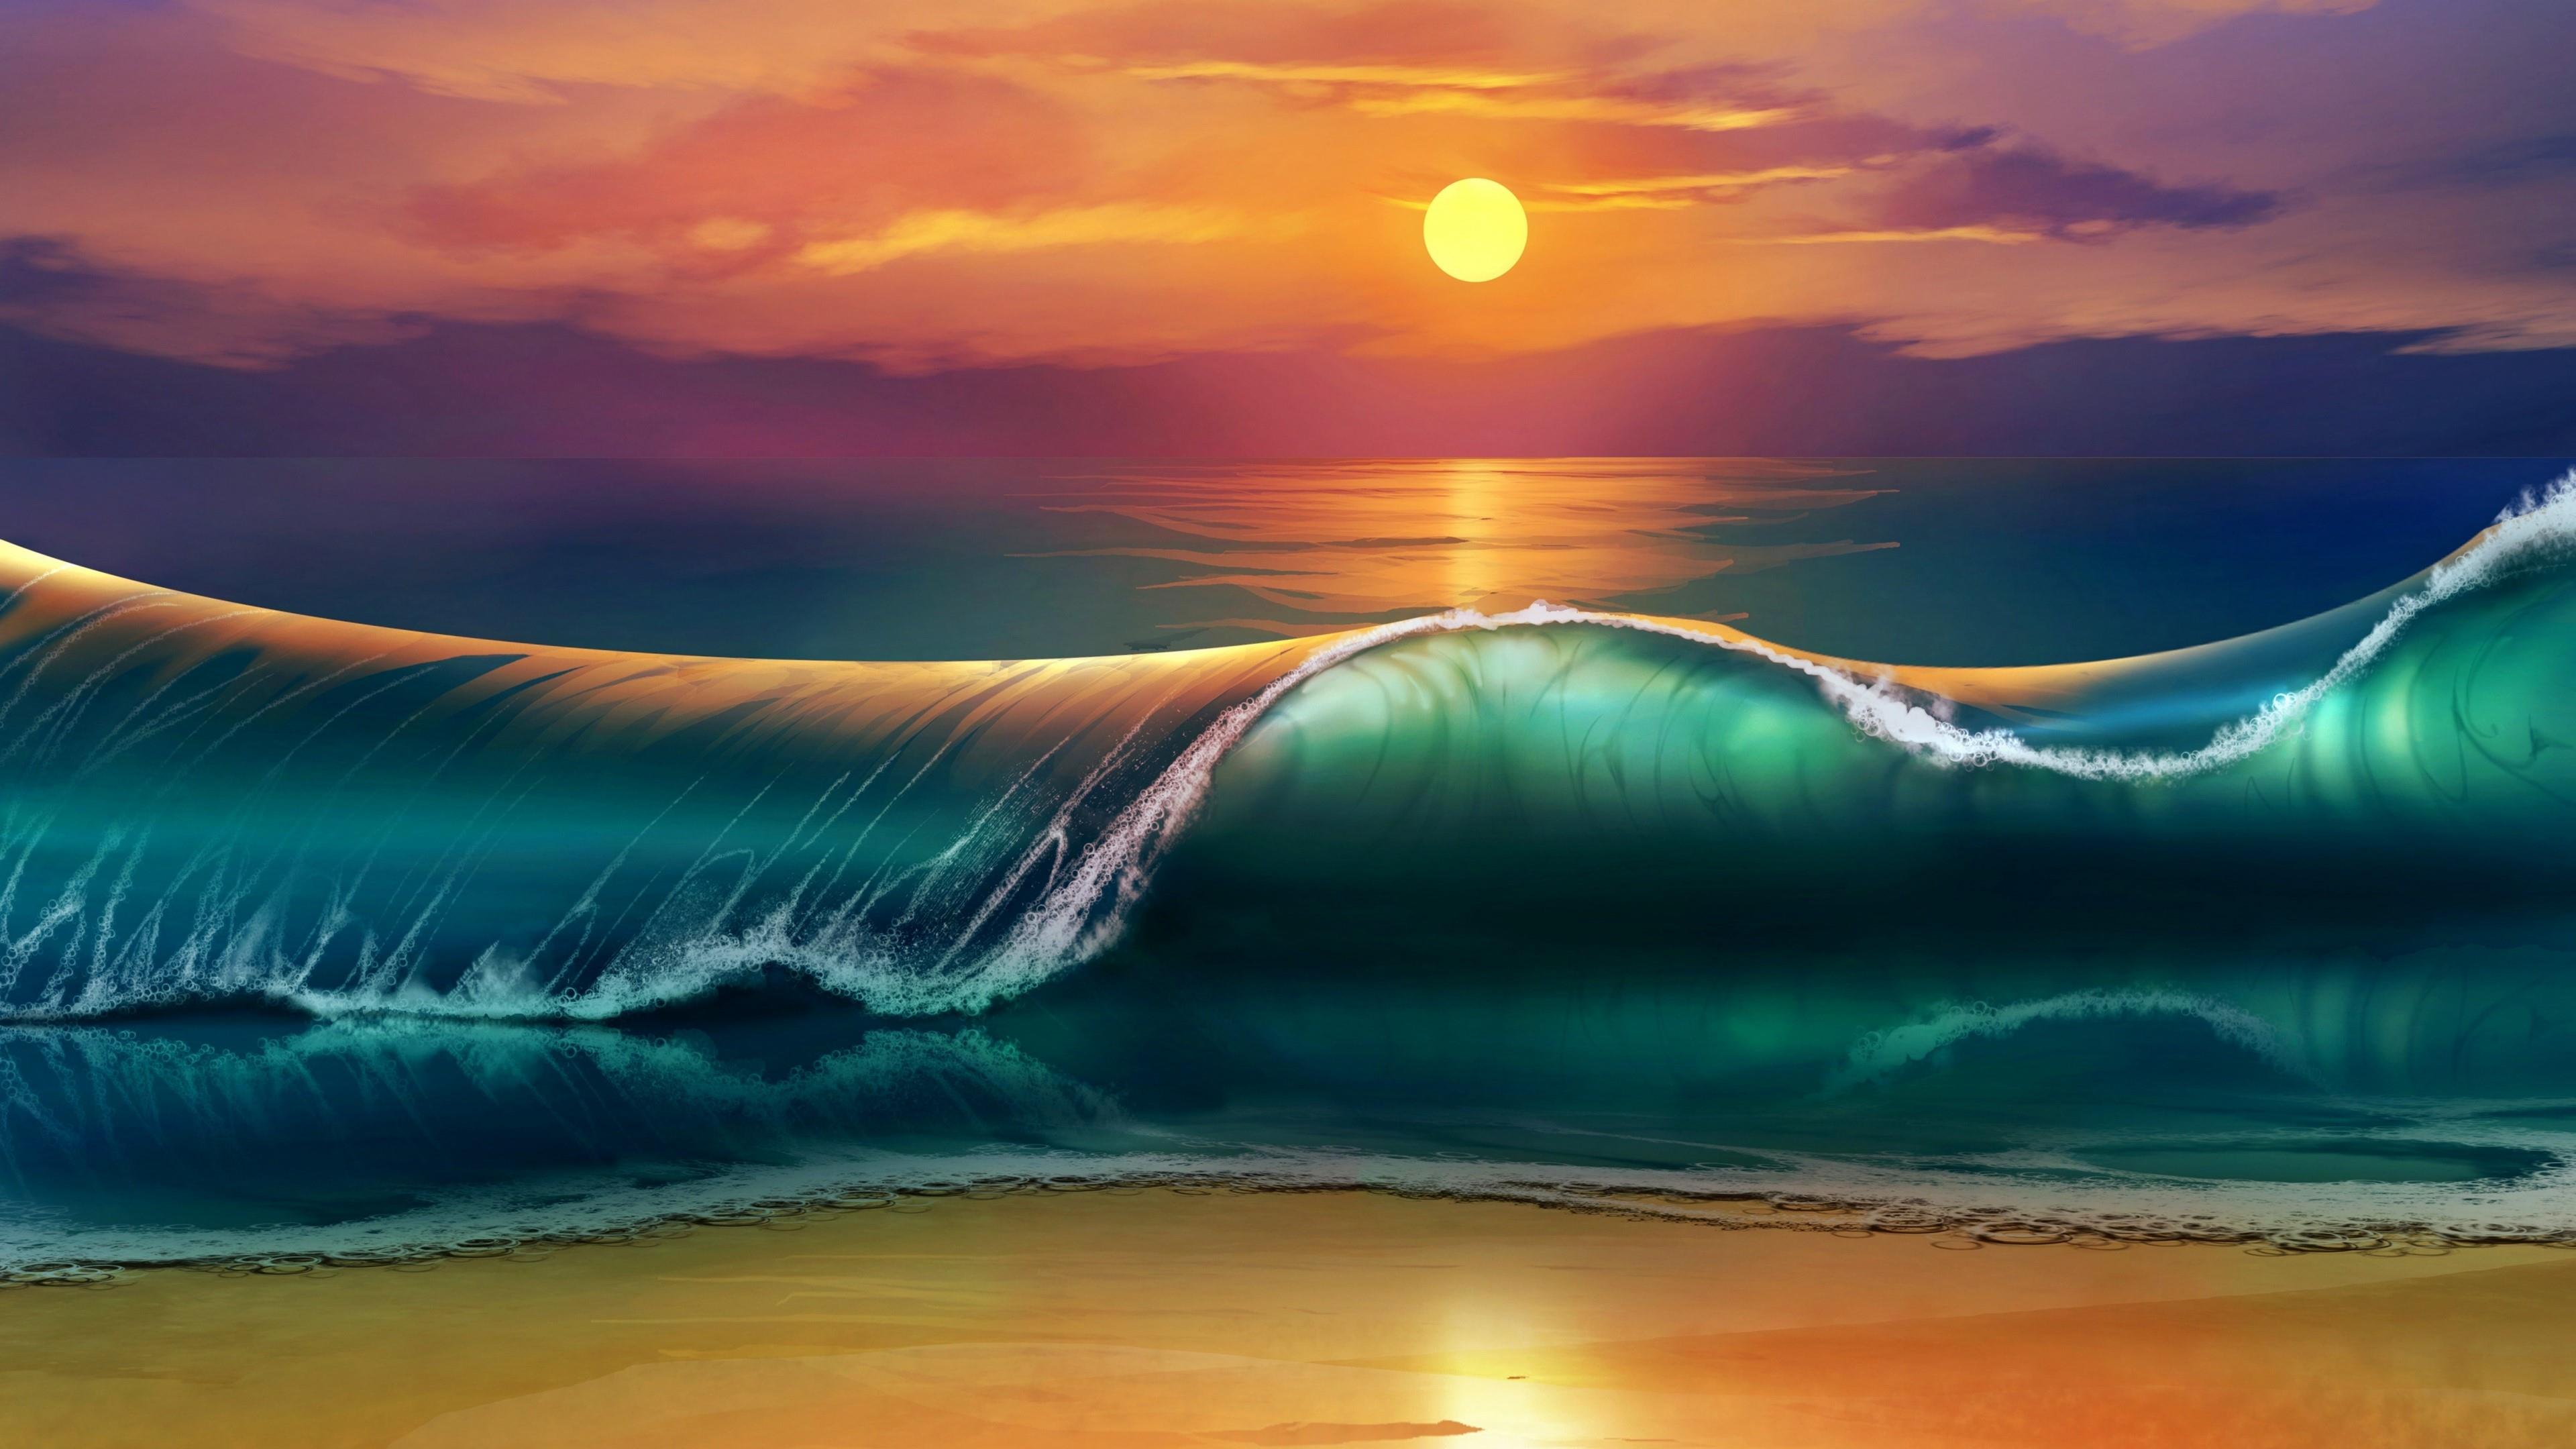 Sunset Sea Waves Beach 4k Ultra Hd Wallpapers For Desktop Mobile Laptop And  Tablet 3840x2160 : 